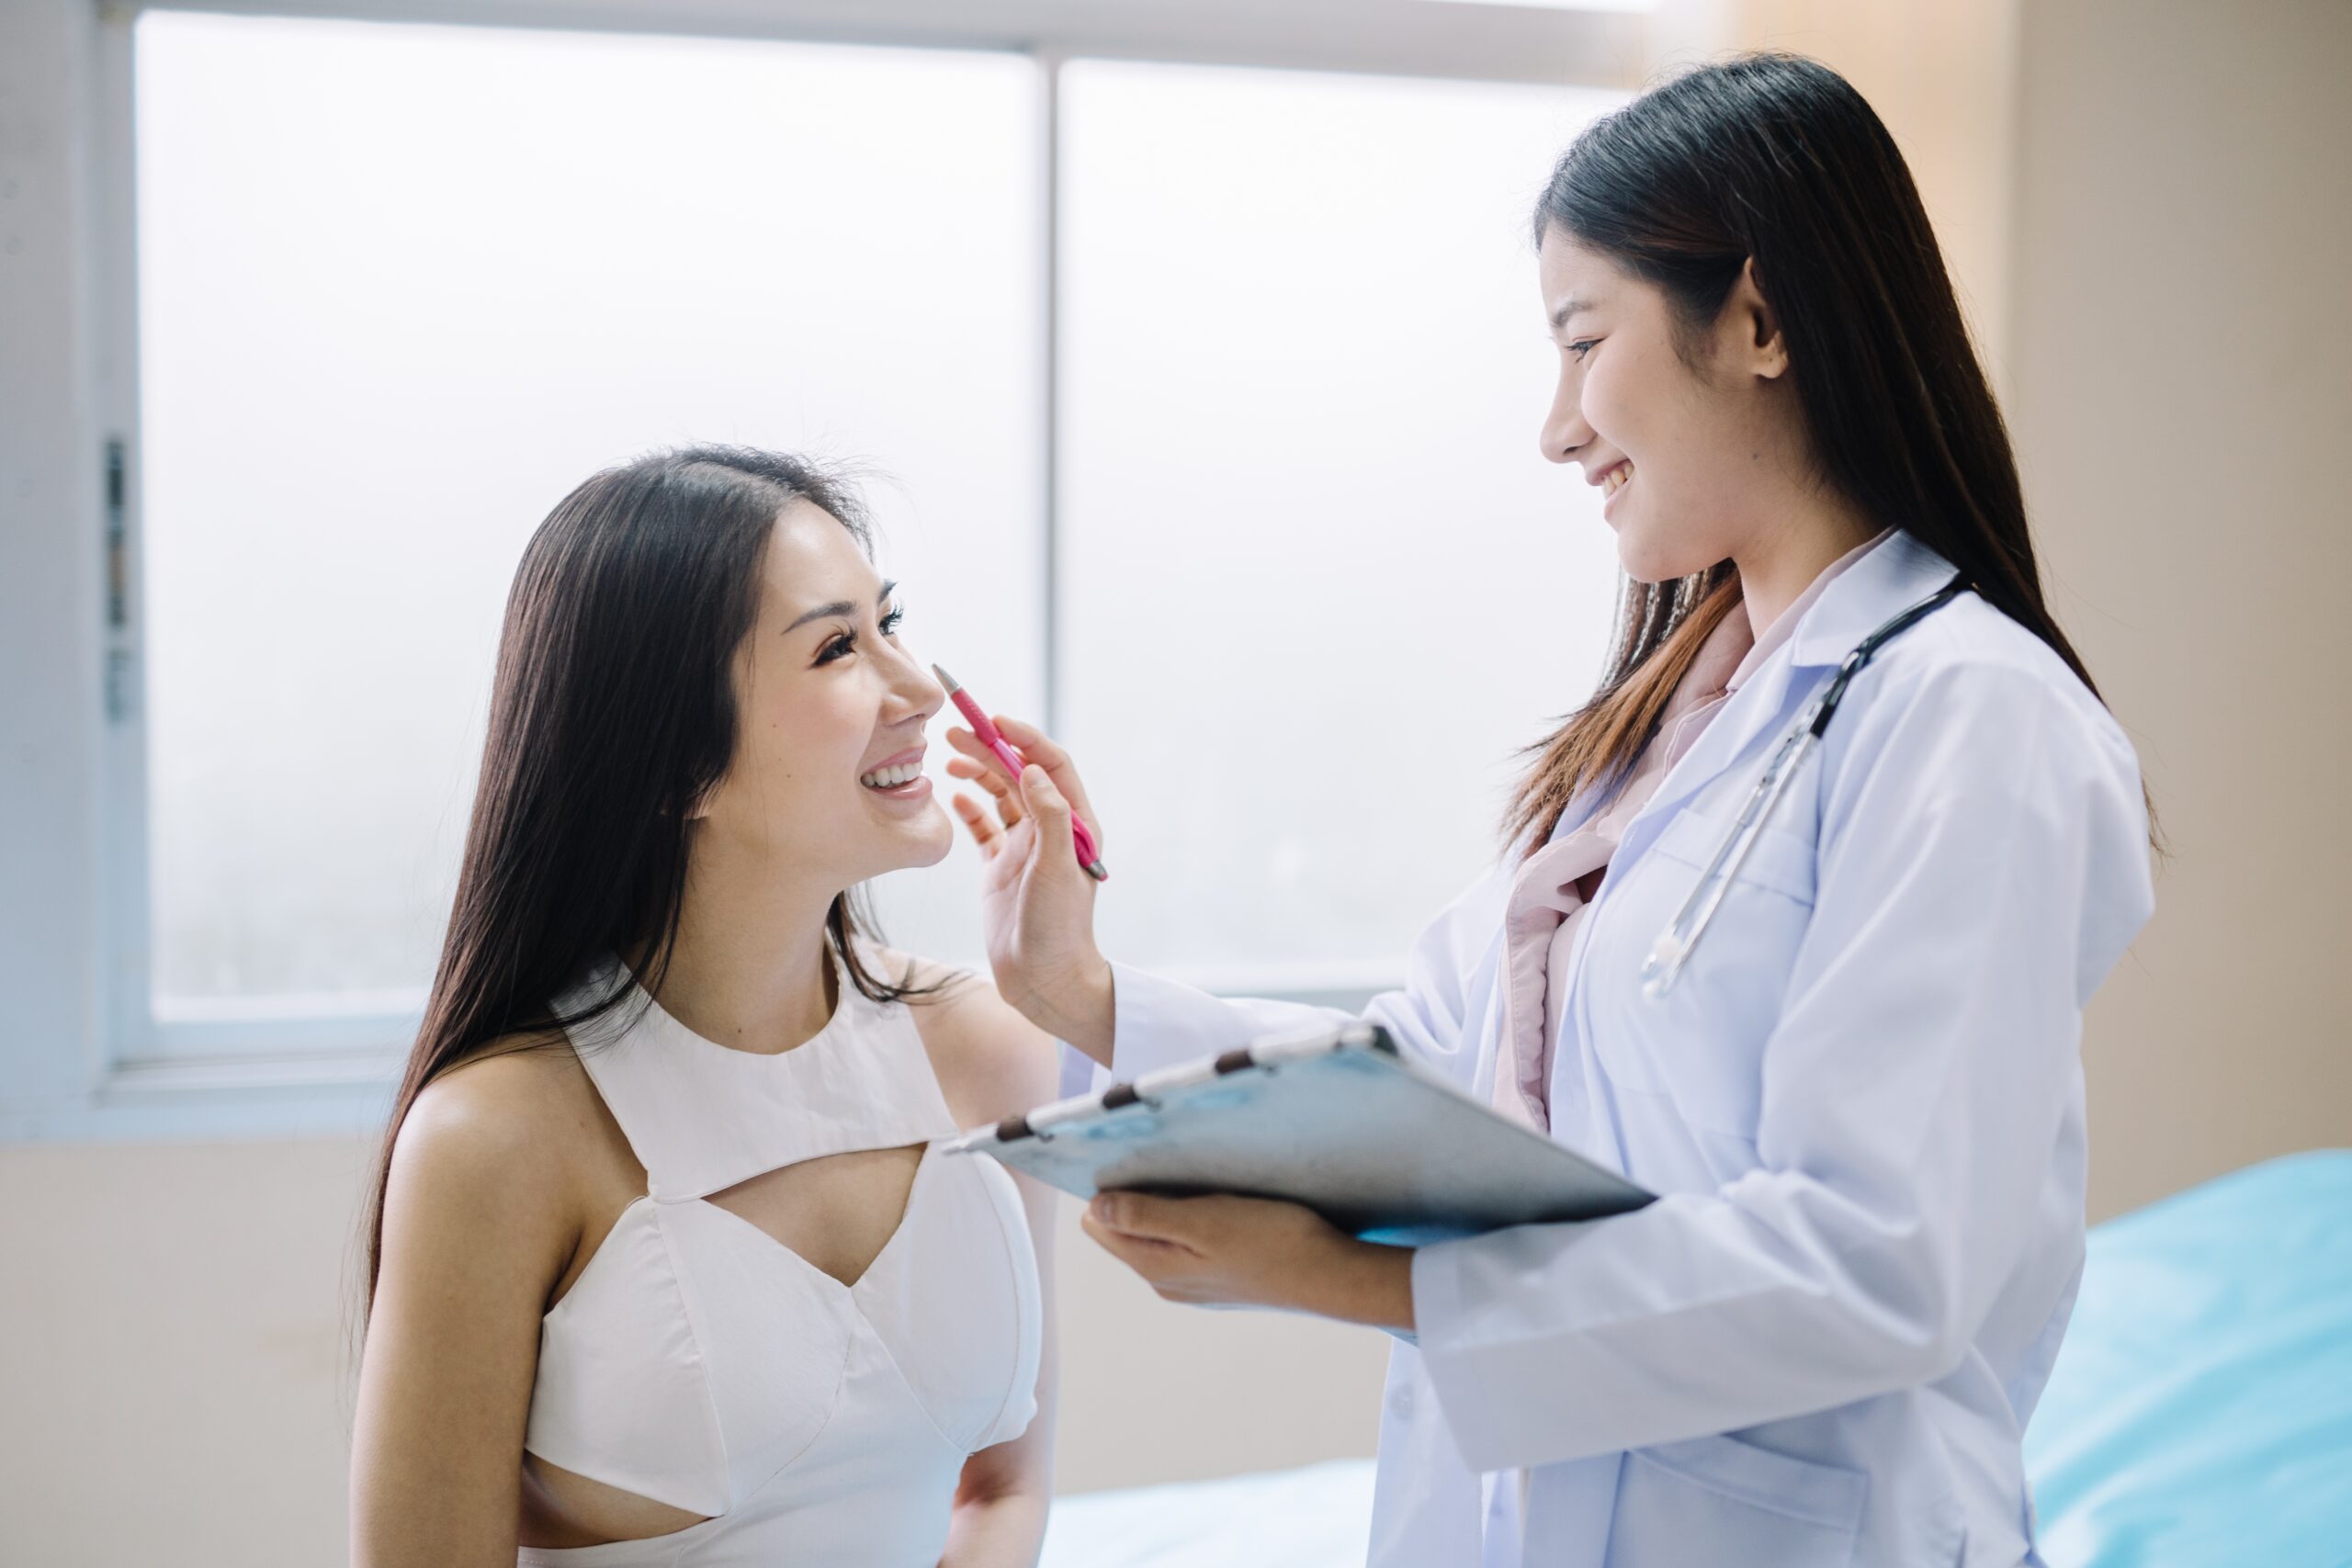 Image of a patient having a post-facelift consultation with a surgeon. The patient and the surgeon are engaged in a conversation, discussing the results of the facelift procedure and the patient's recovery progress.